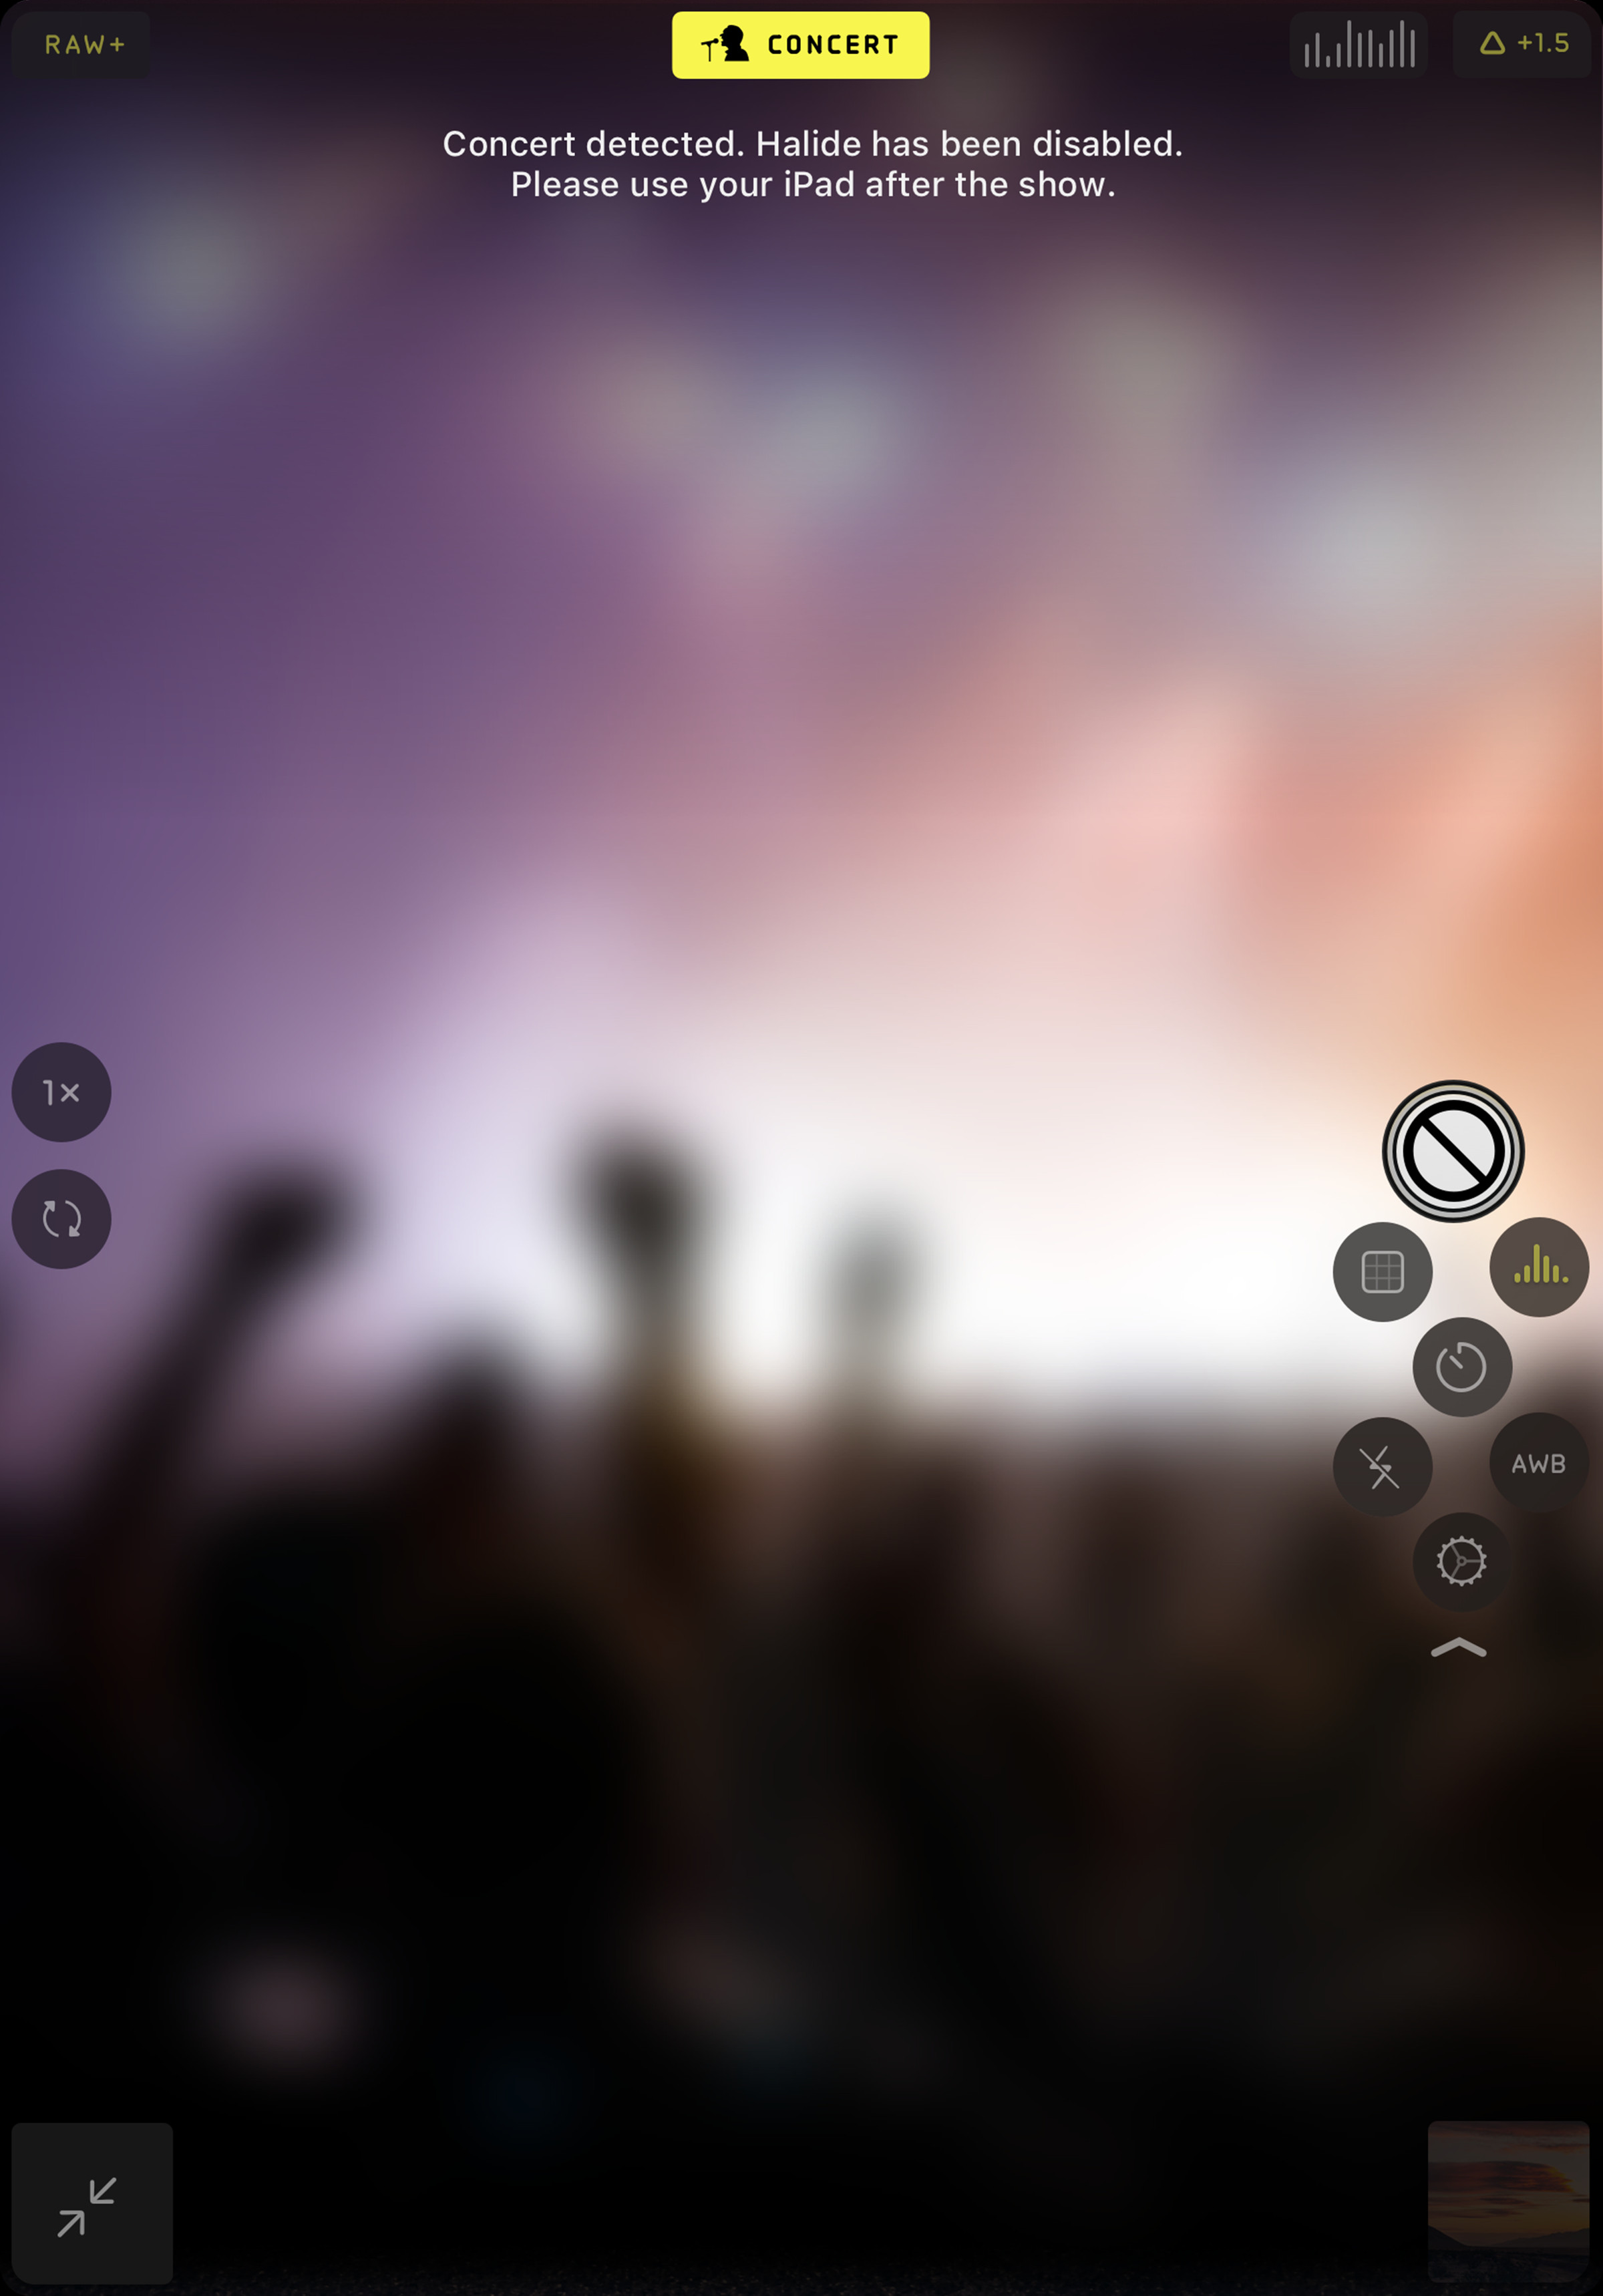 A proof of concept for a potential “Concert Mode.”